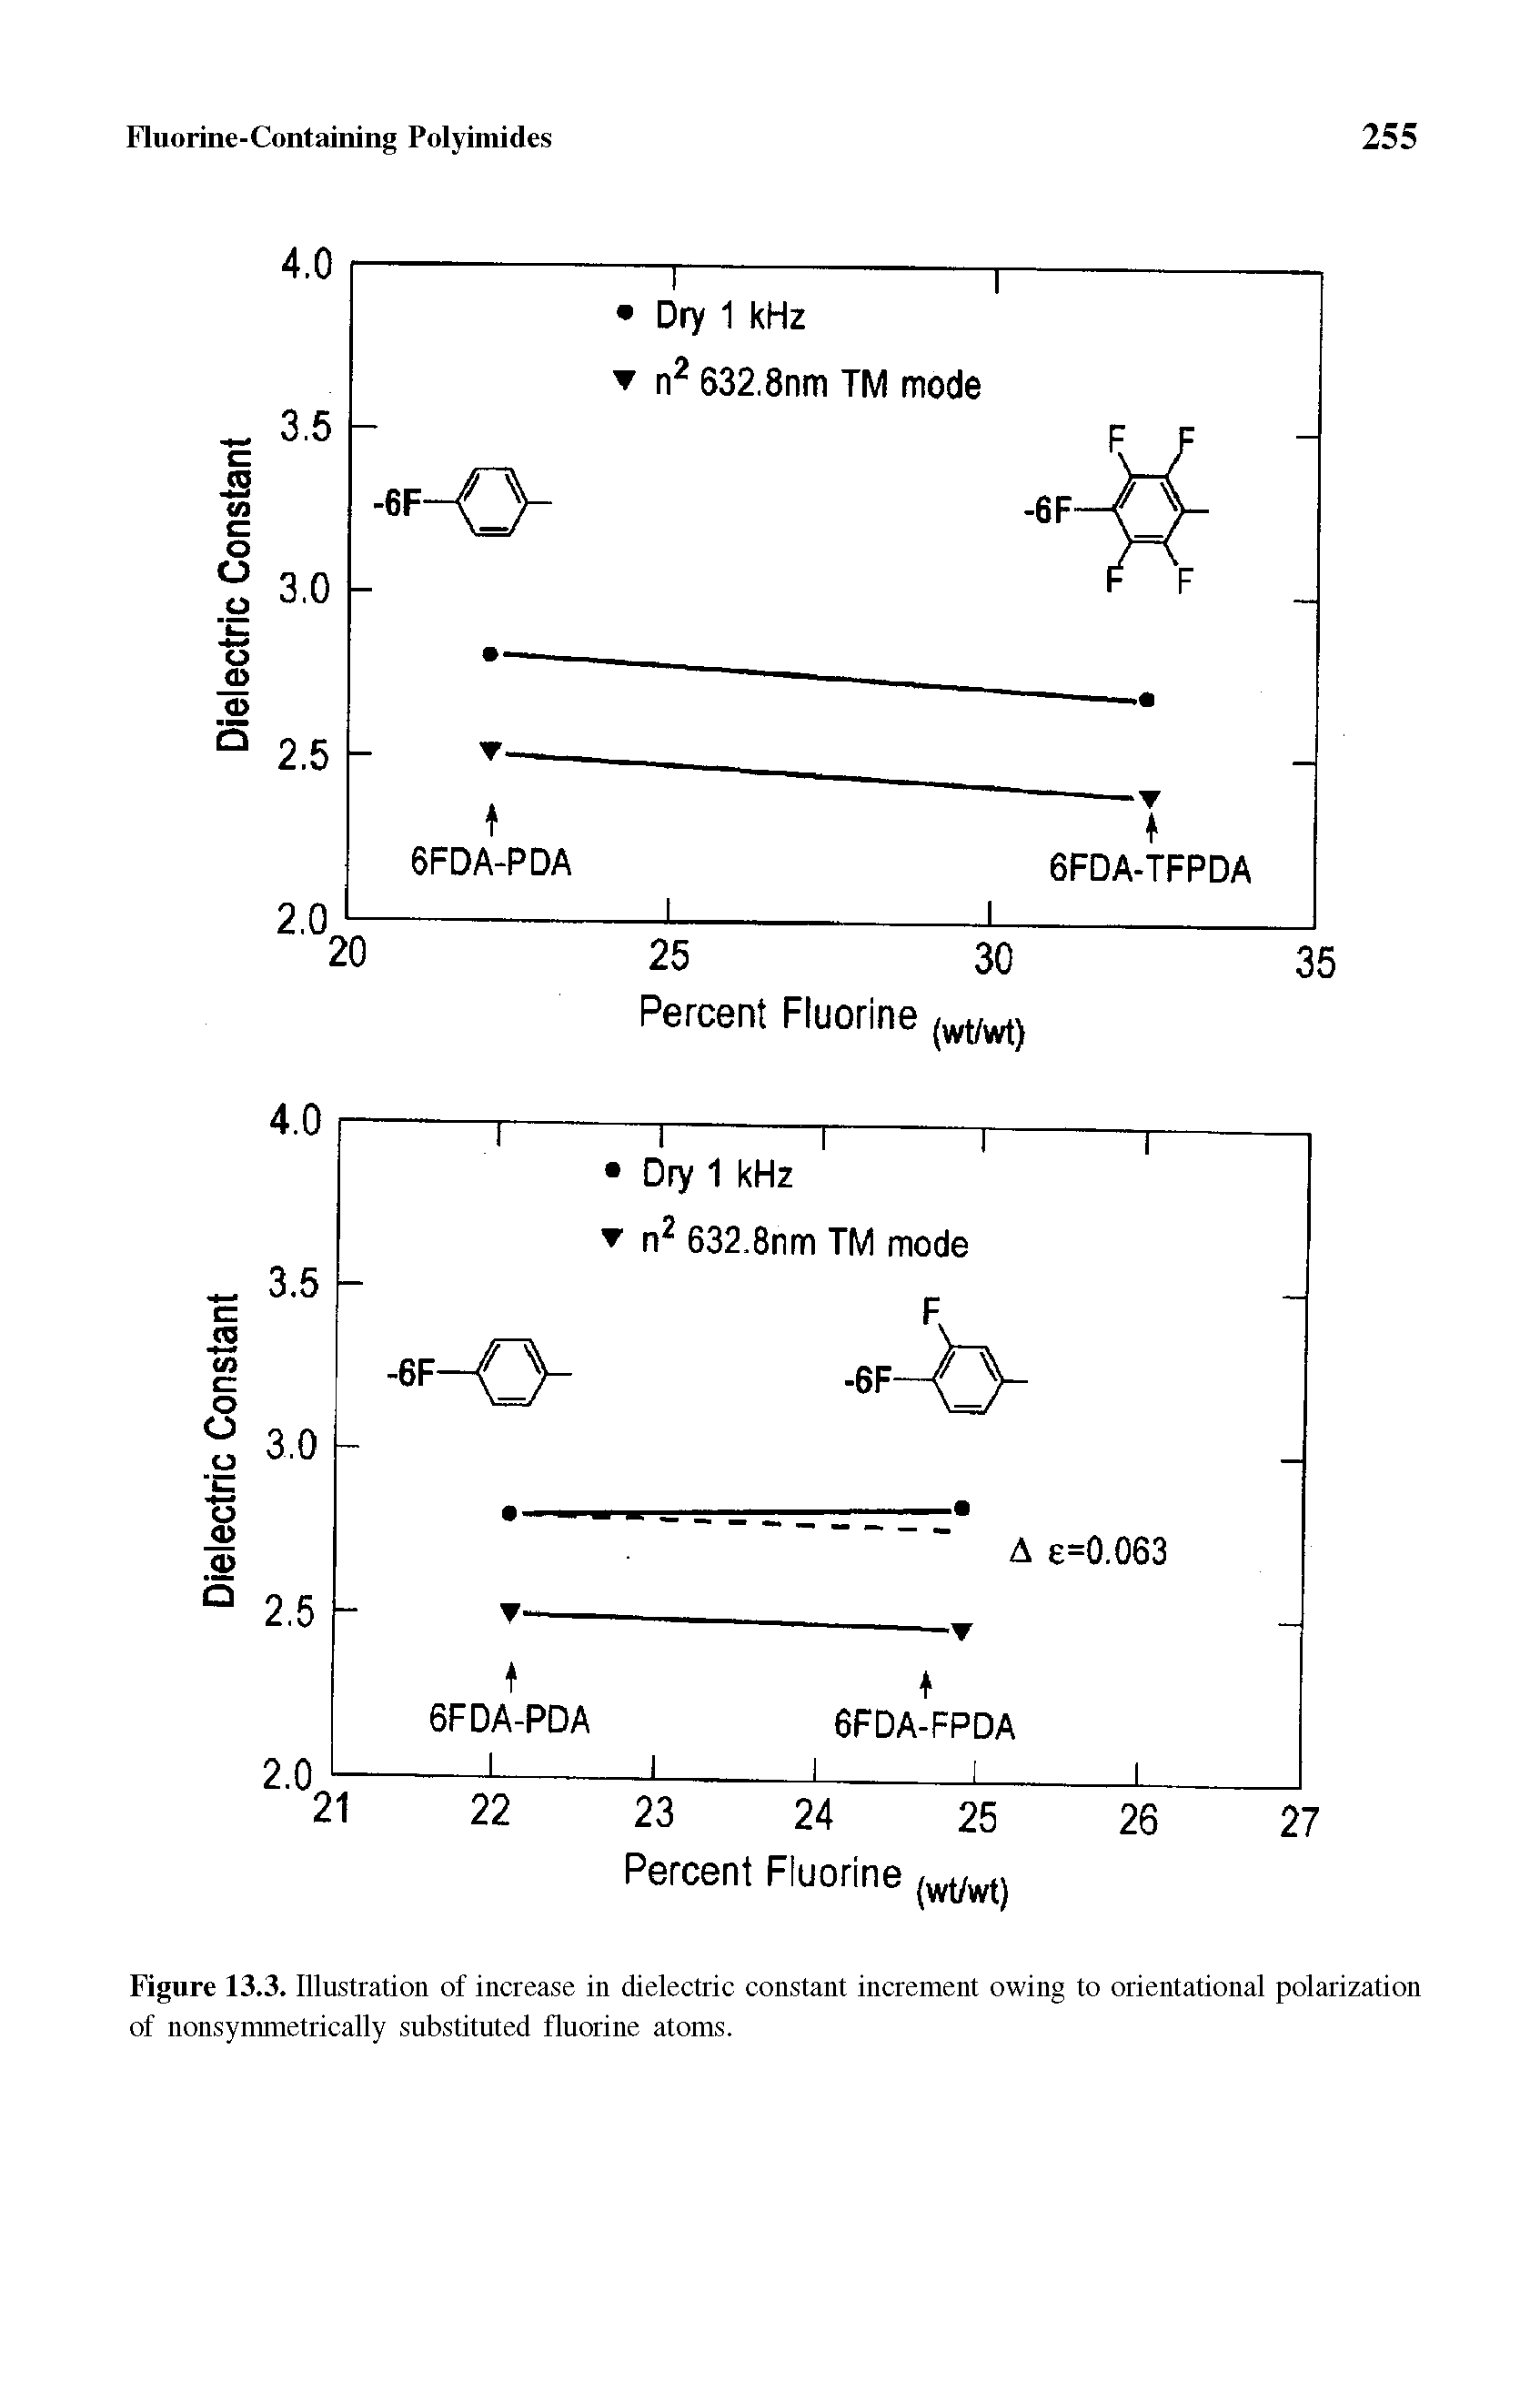 Figure 13.3. Illustration of increase in dielectric constant increment owing to orientational polarization of nonsymmetrically substituted fluorine atoms.